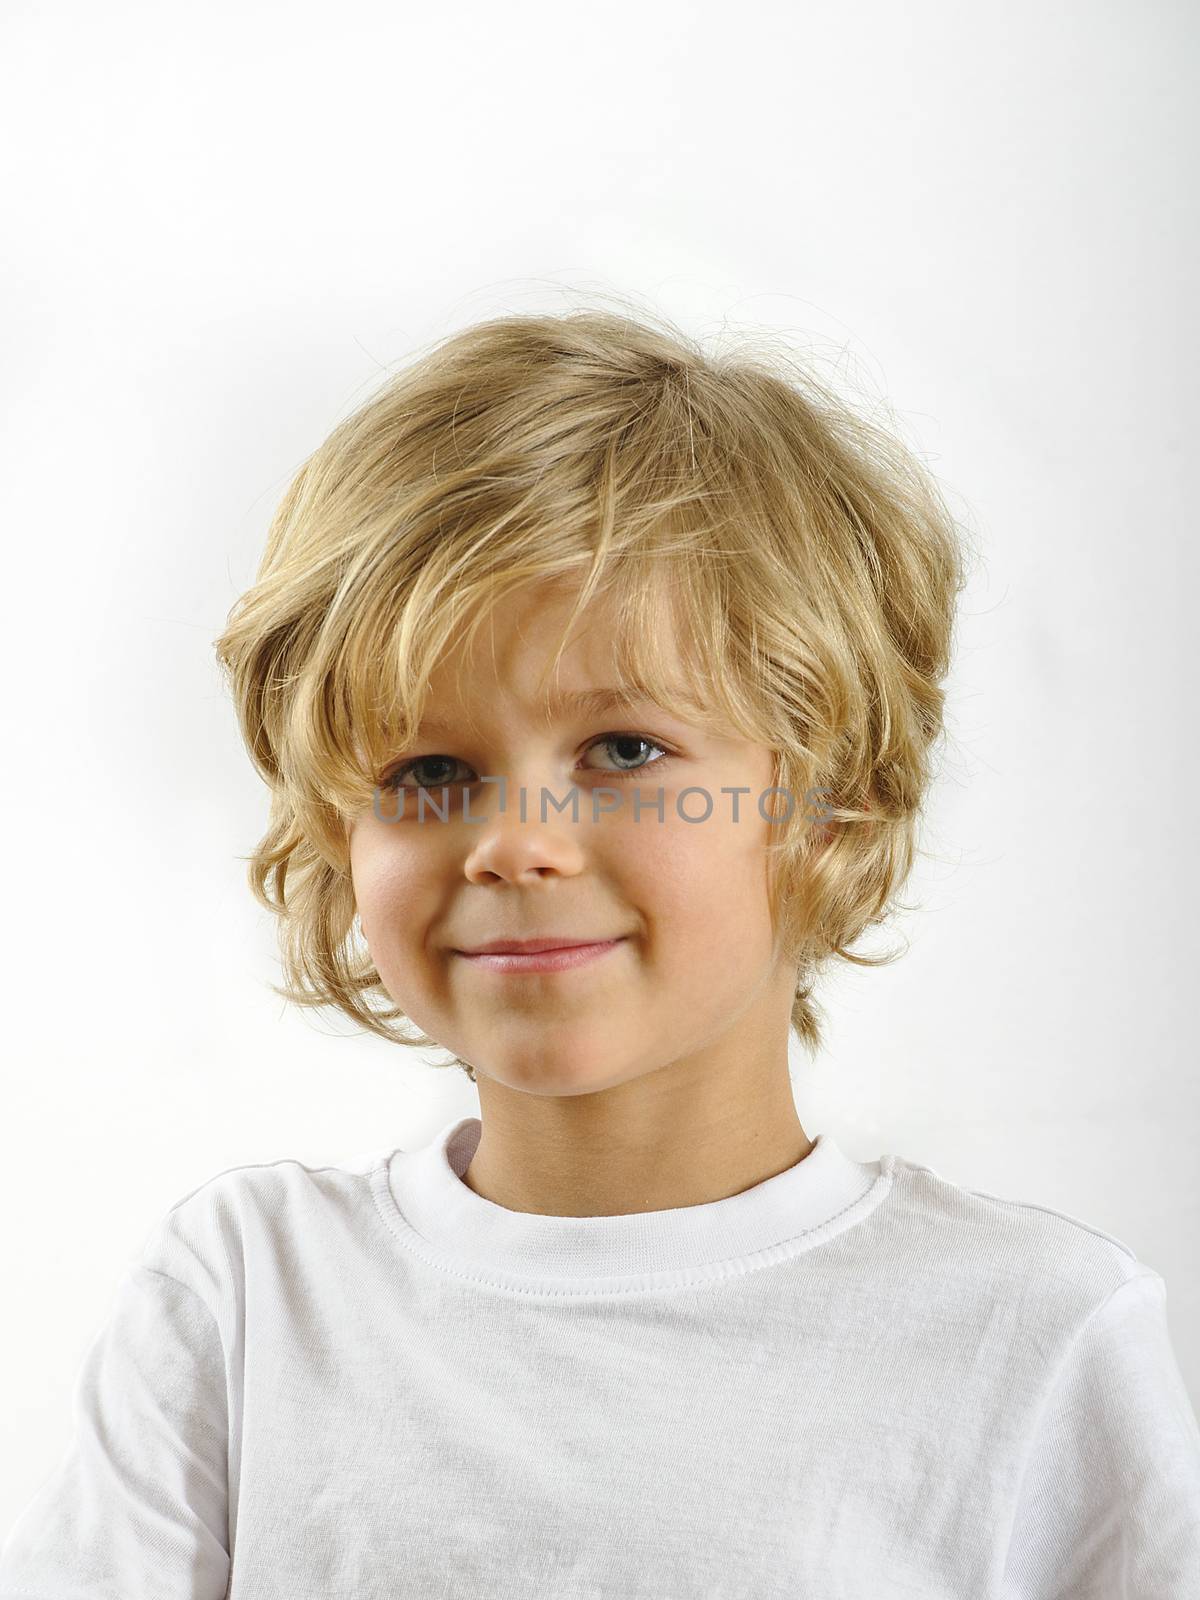 Young blond haired boy looking at camera. He's wearing a white shirt. Background is white